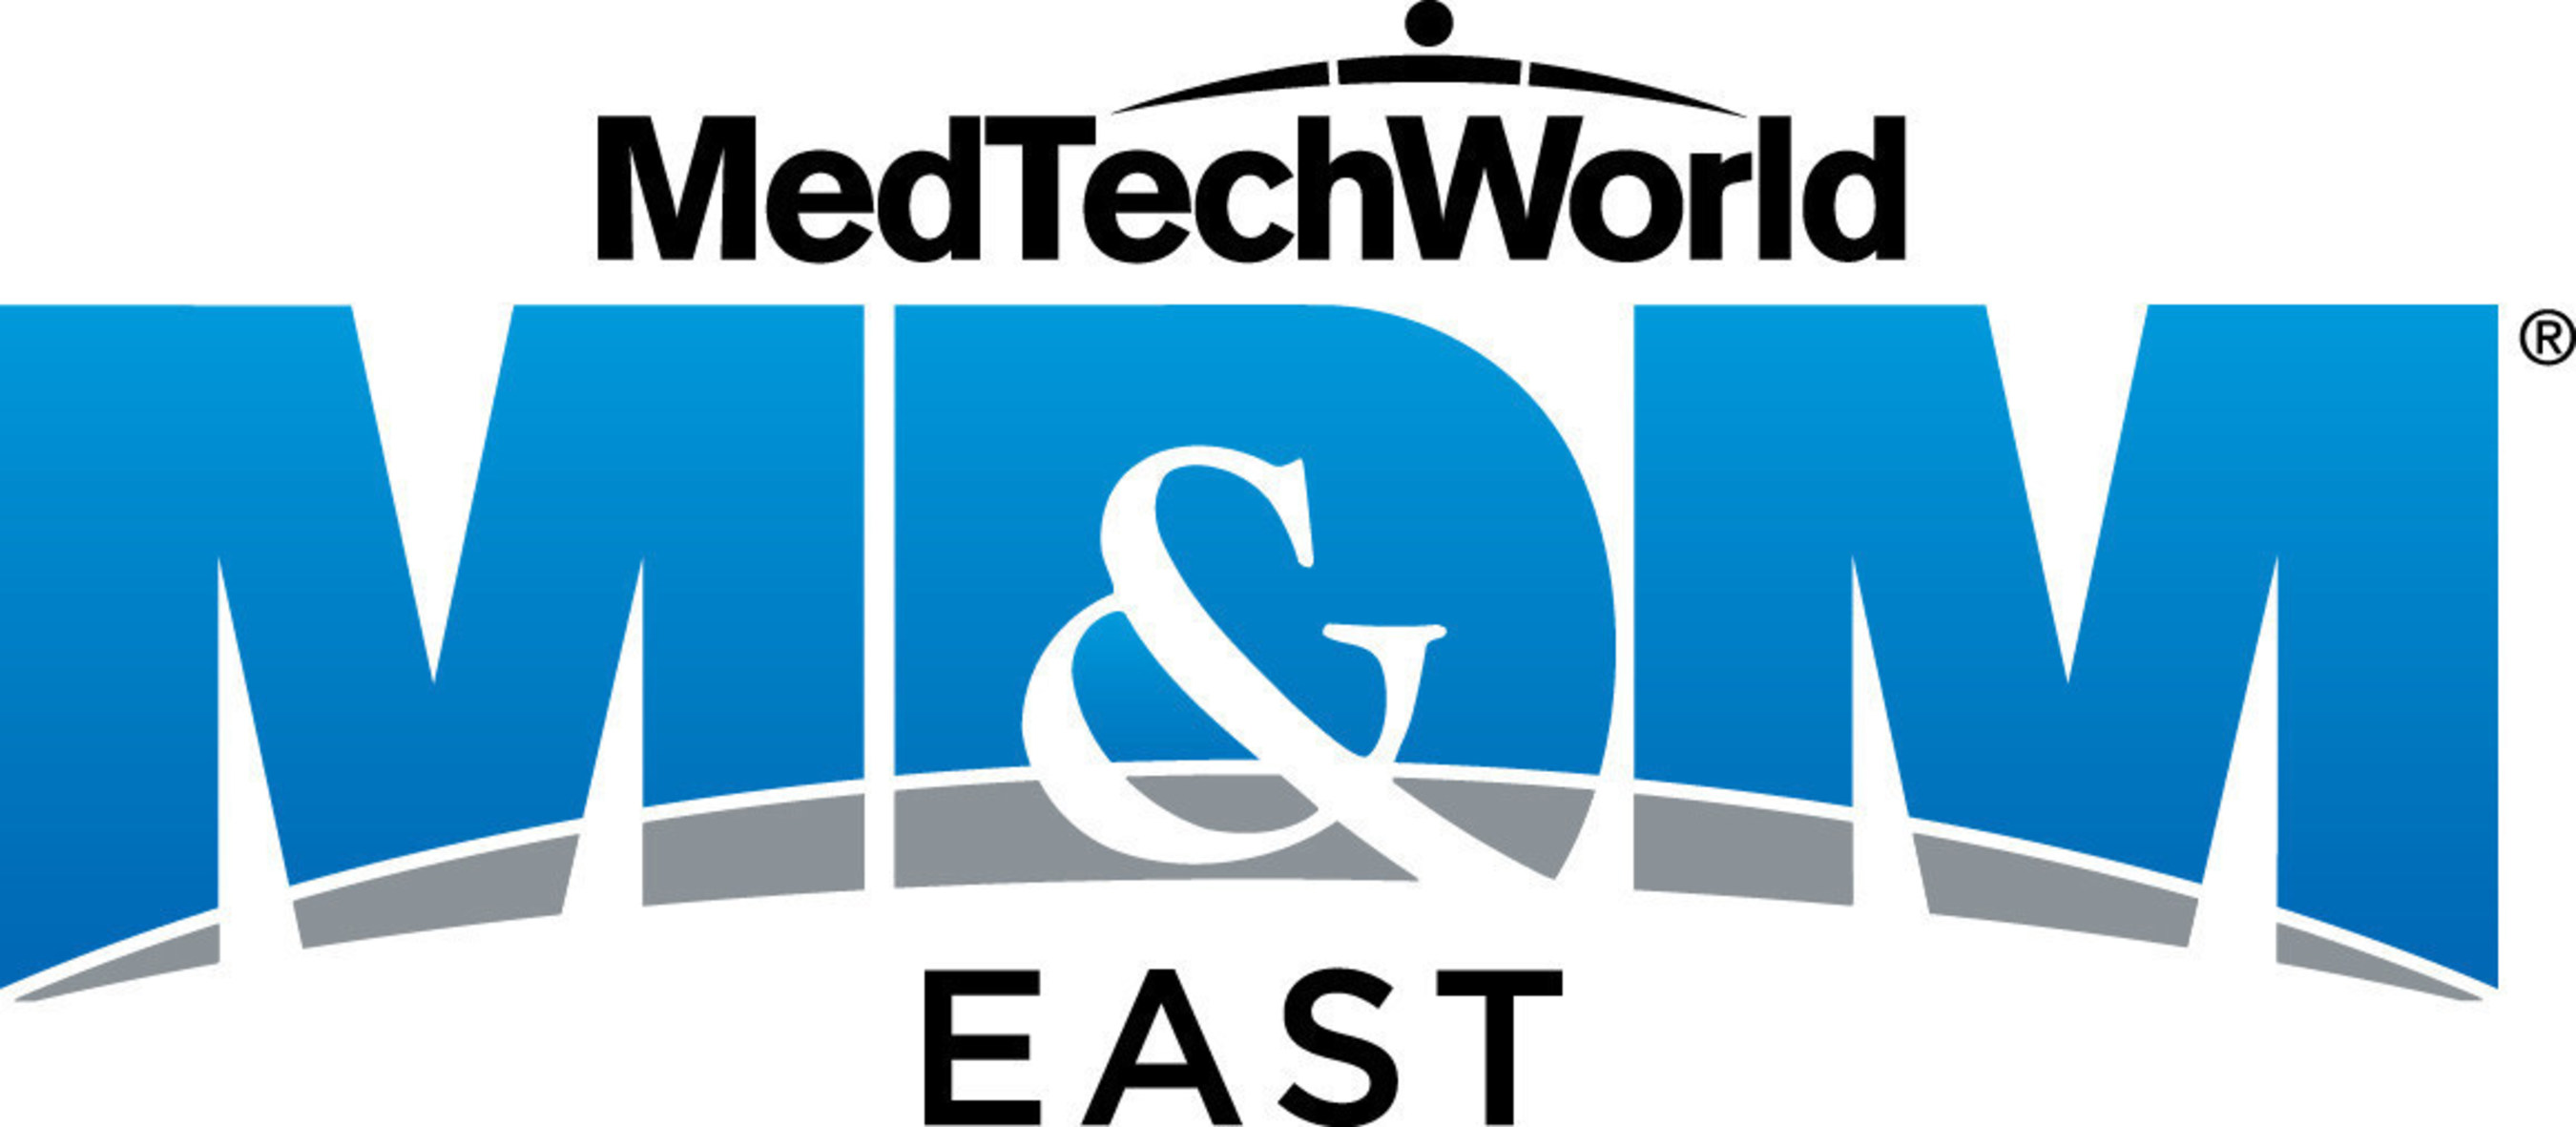 MD&M East will be at the Javits Convention Center in New York City, June 9-11, 2015